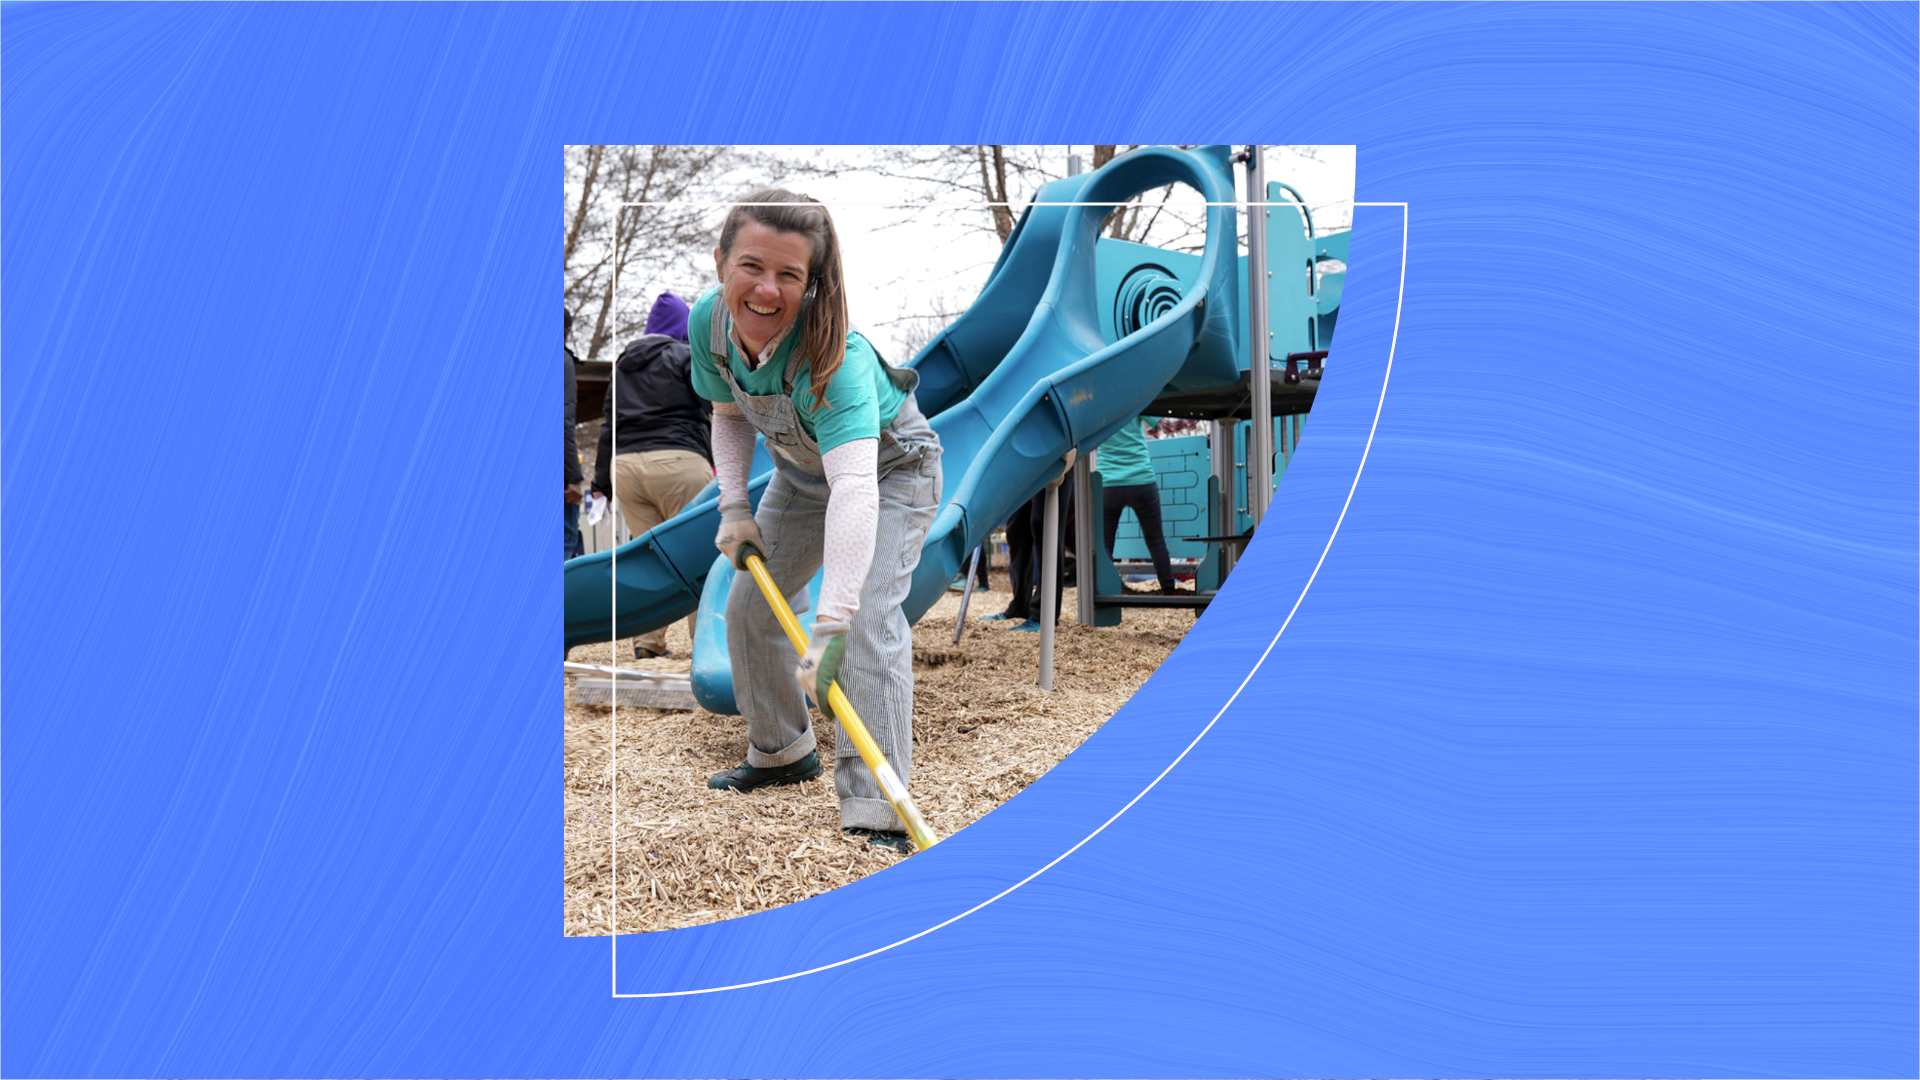 Quility team member volunteers at local playground